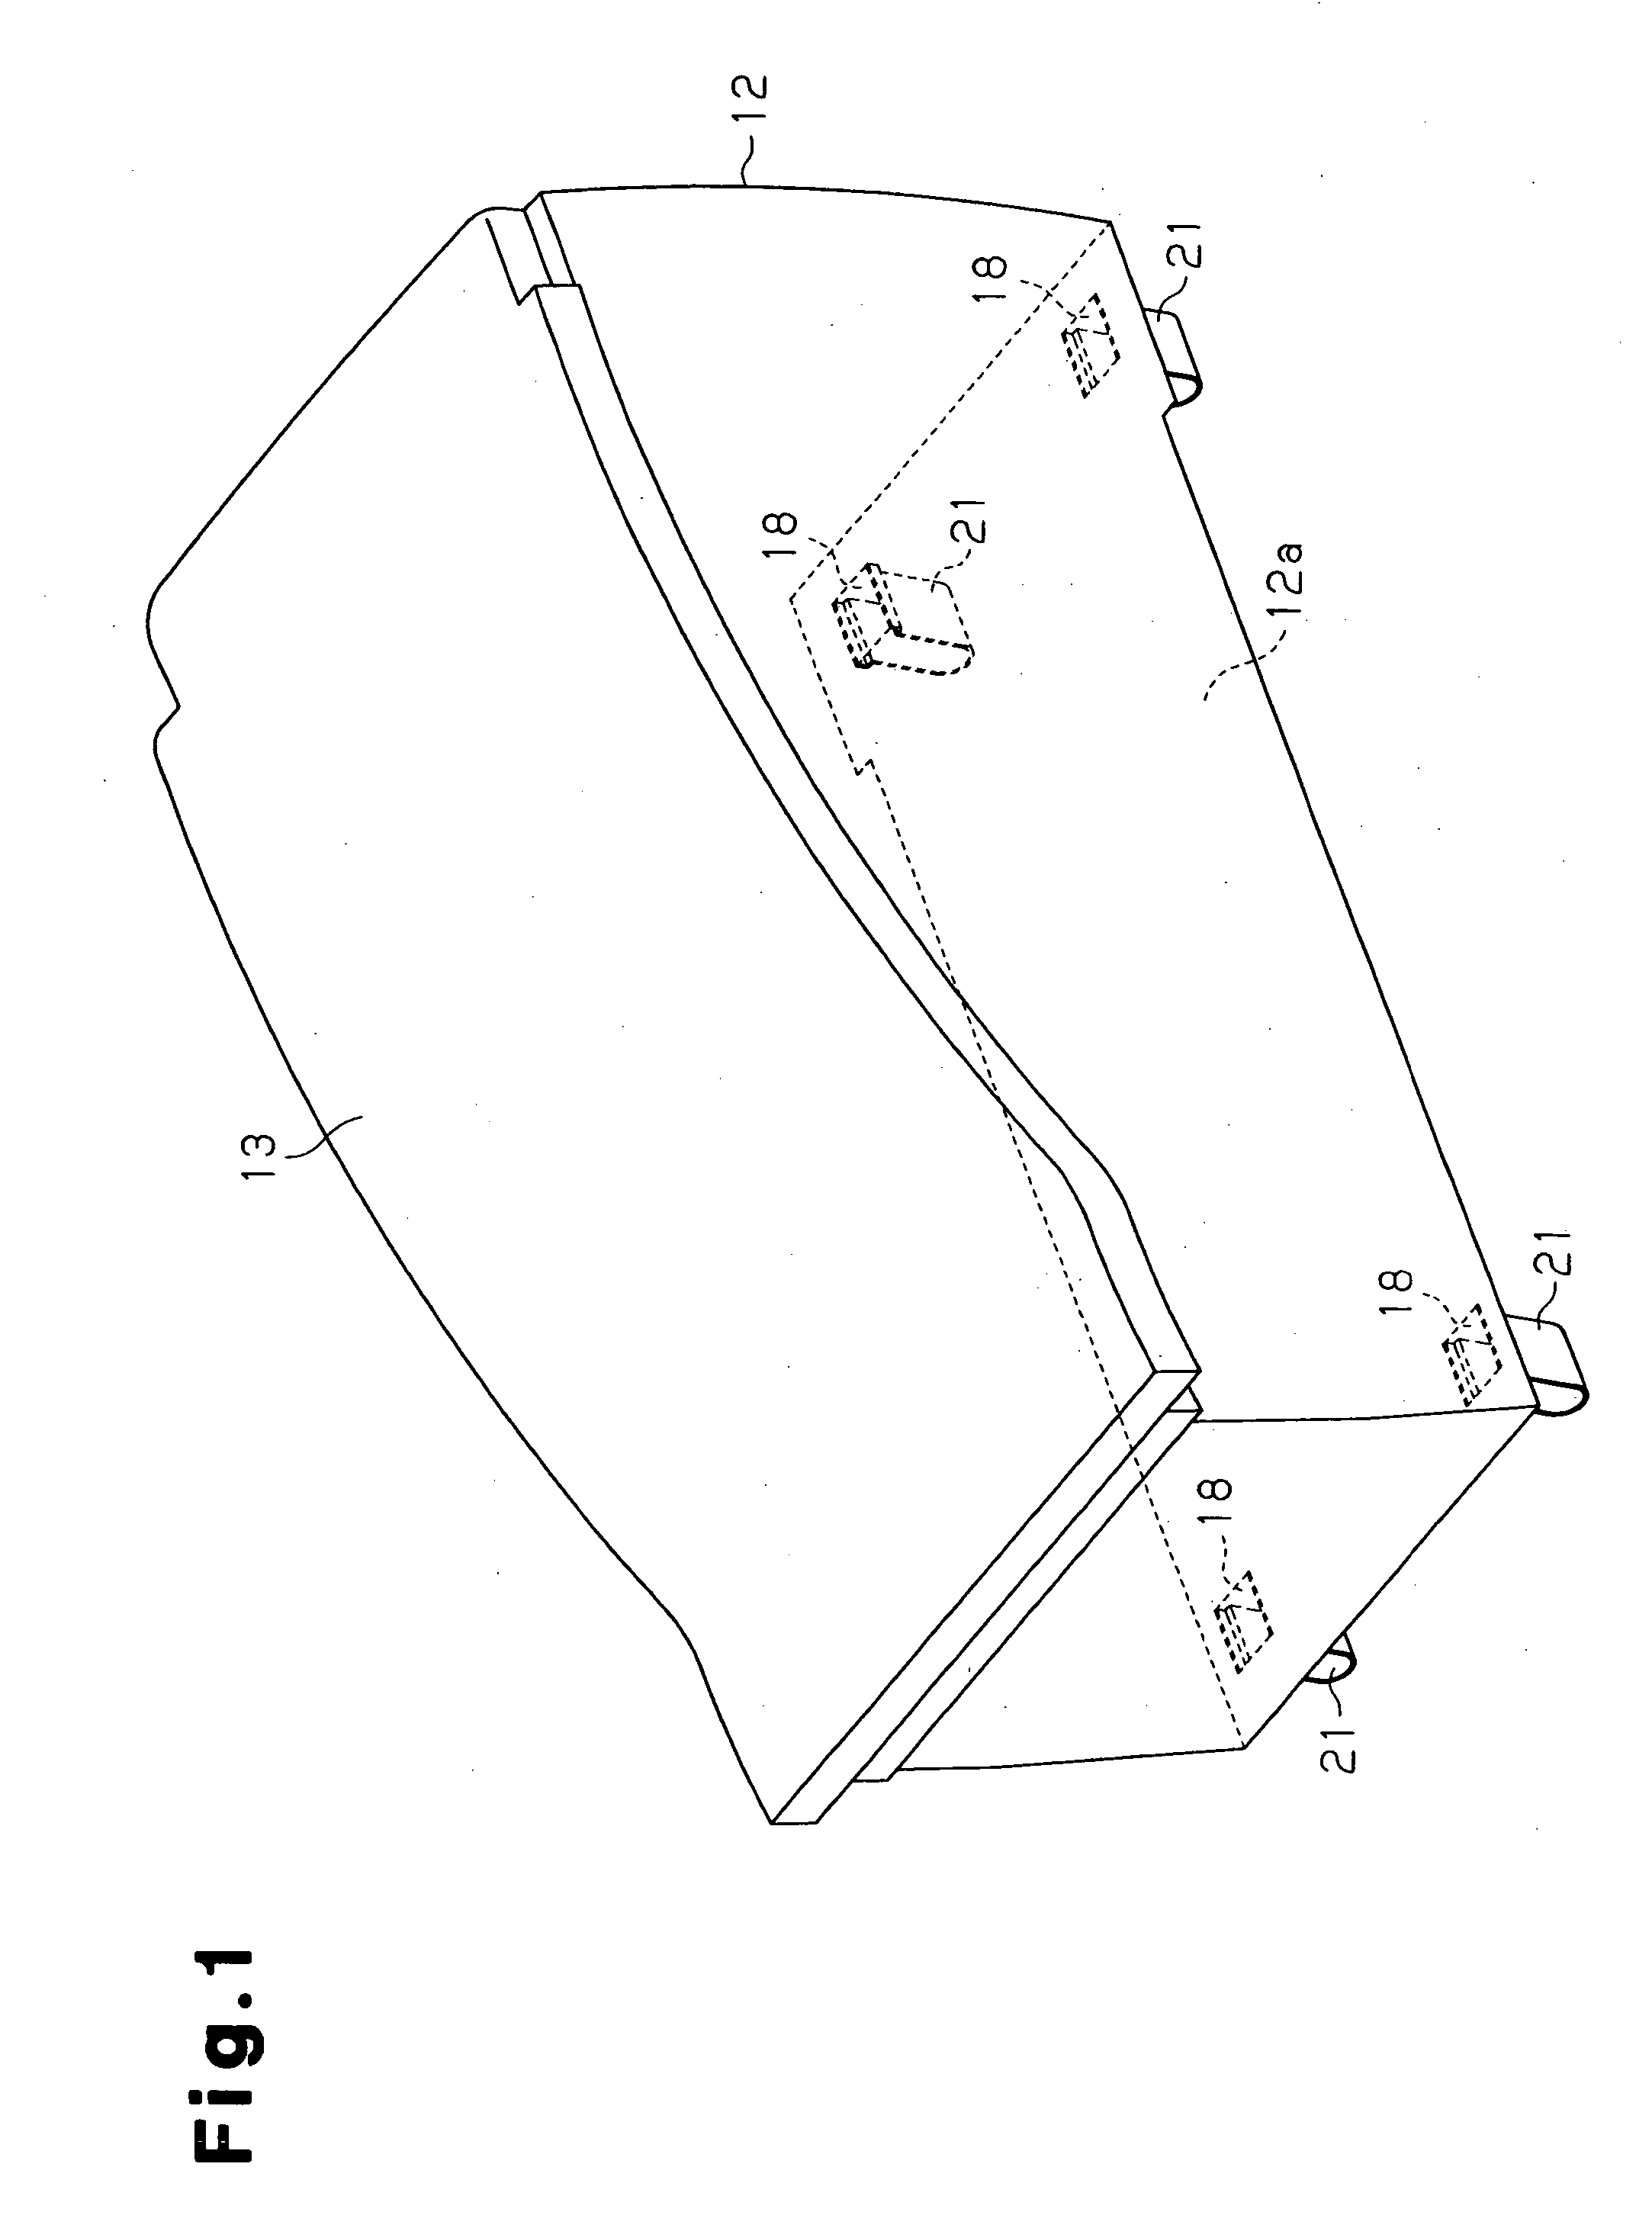 Mounting structure for console